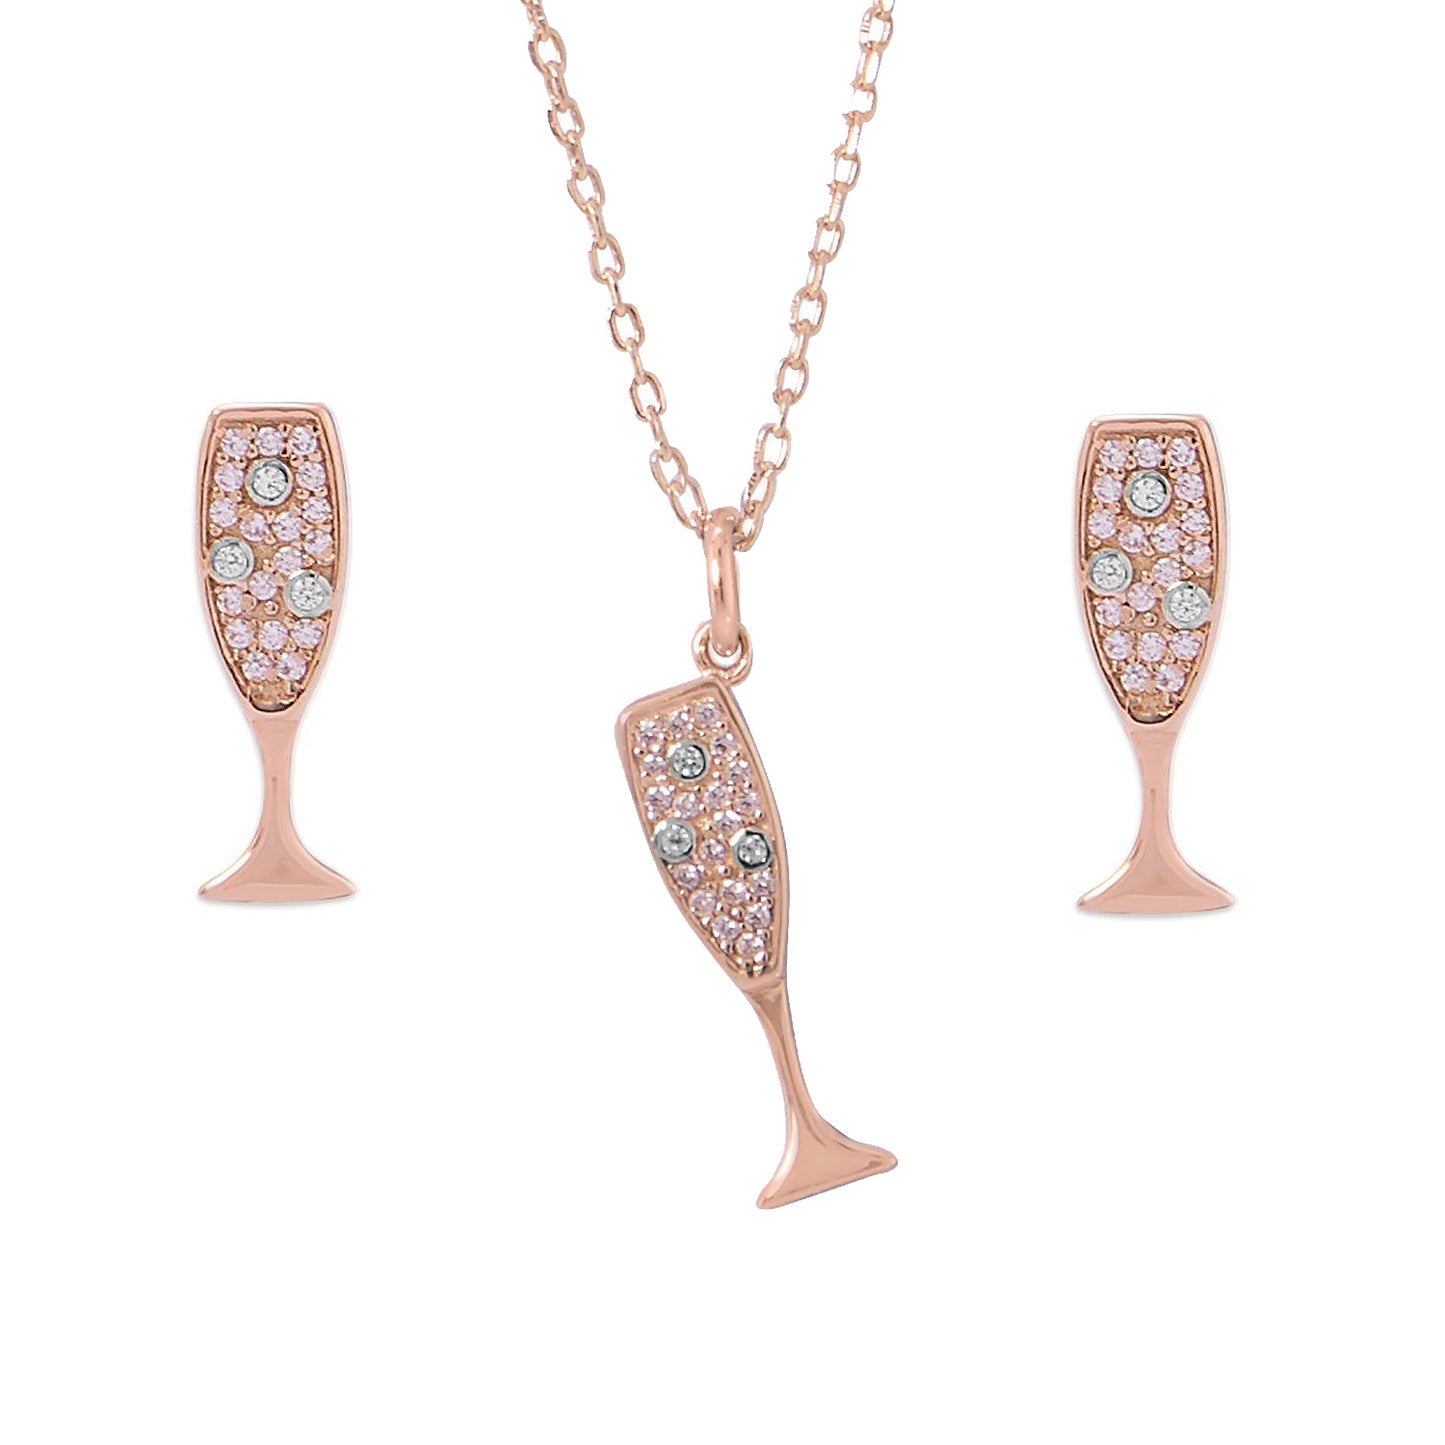 14k Gold-Plated Sterling Silver Cubic Zirconia Champagne Glass Earring and Necklace Set